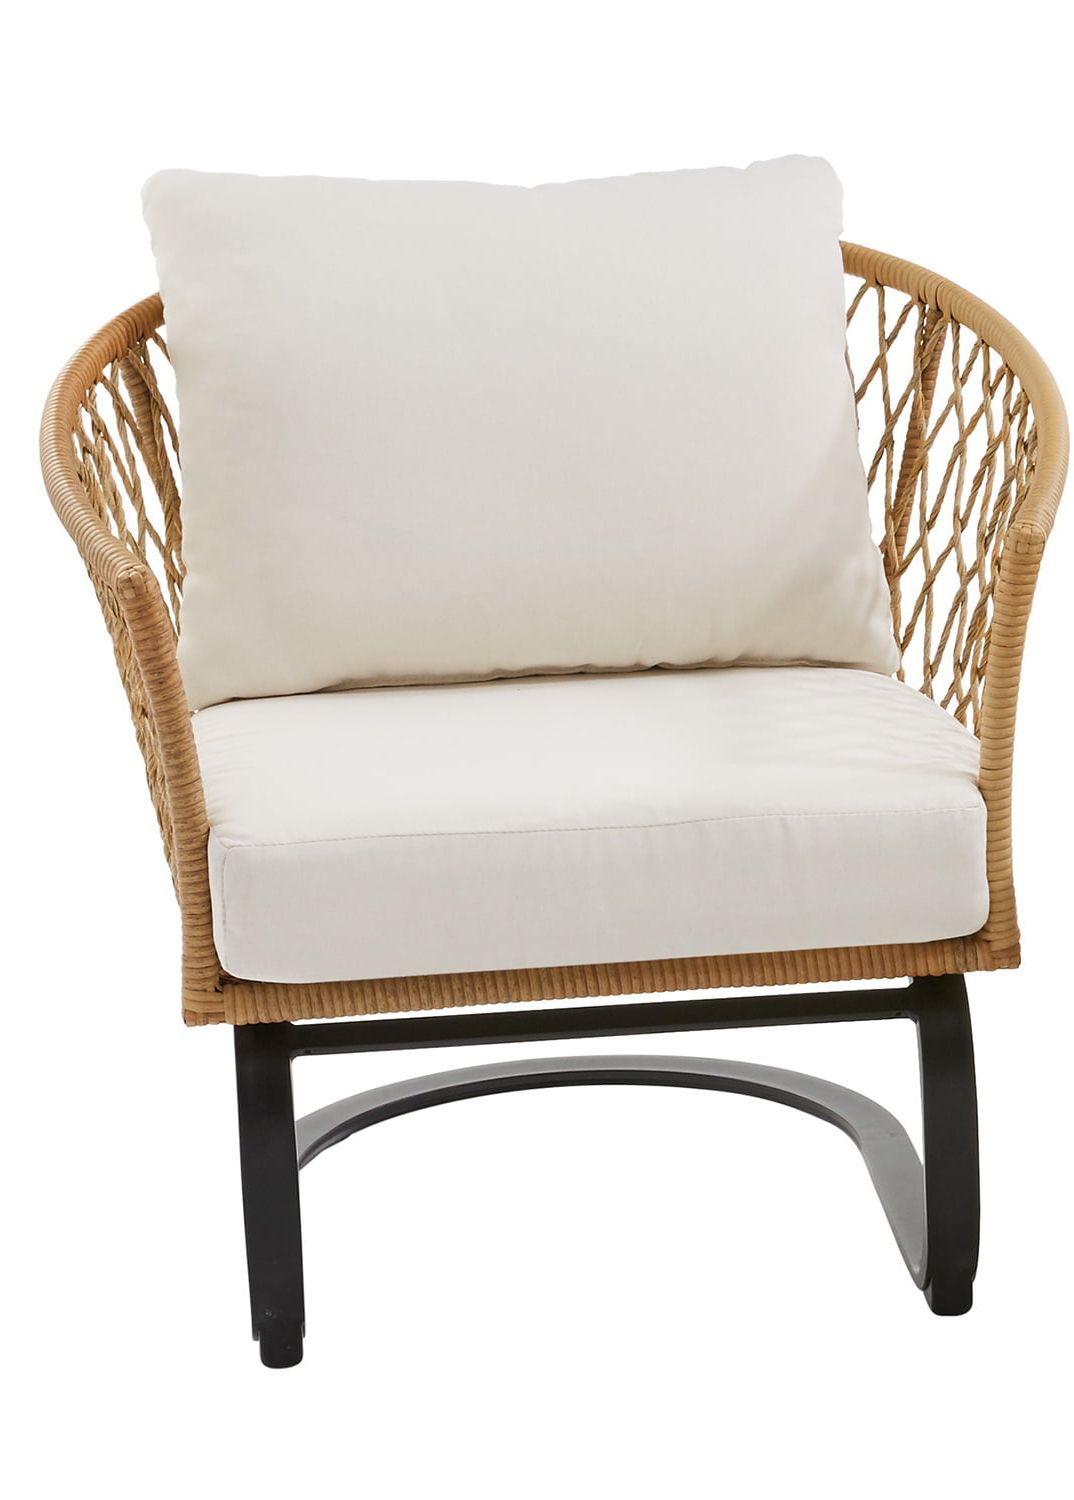 Well Known Better Homes & Gardens Ventura 3 Piece White Outdoor Boho Wicker Chat Set,  Wicker Frame – Walmart Intended For 3 Piece Outdoor Boho Wicker Chat Set (Photo 2 of 15)